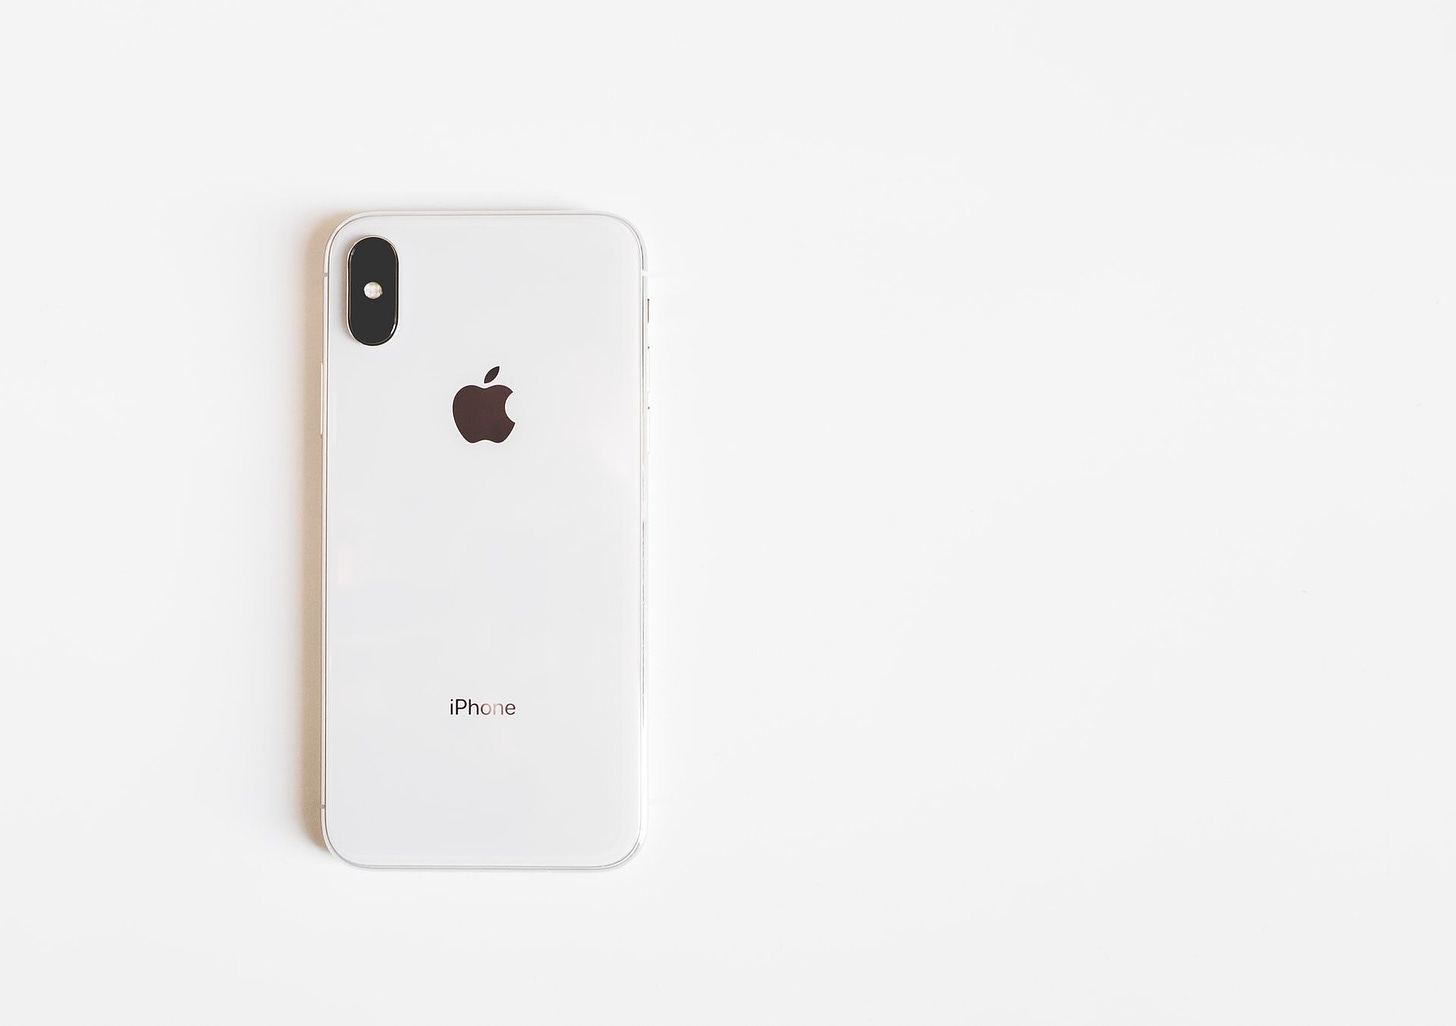 The Distraction Free iPhone